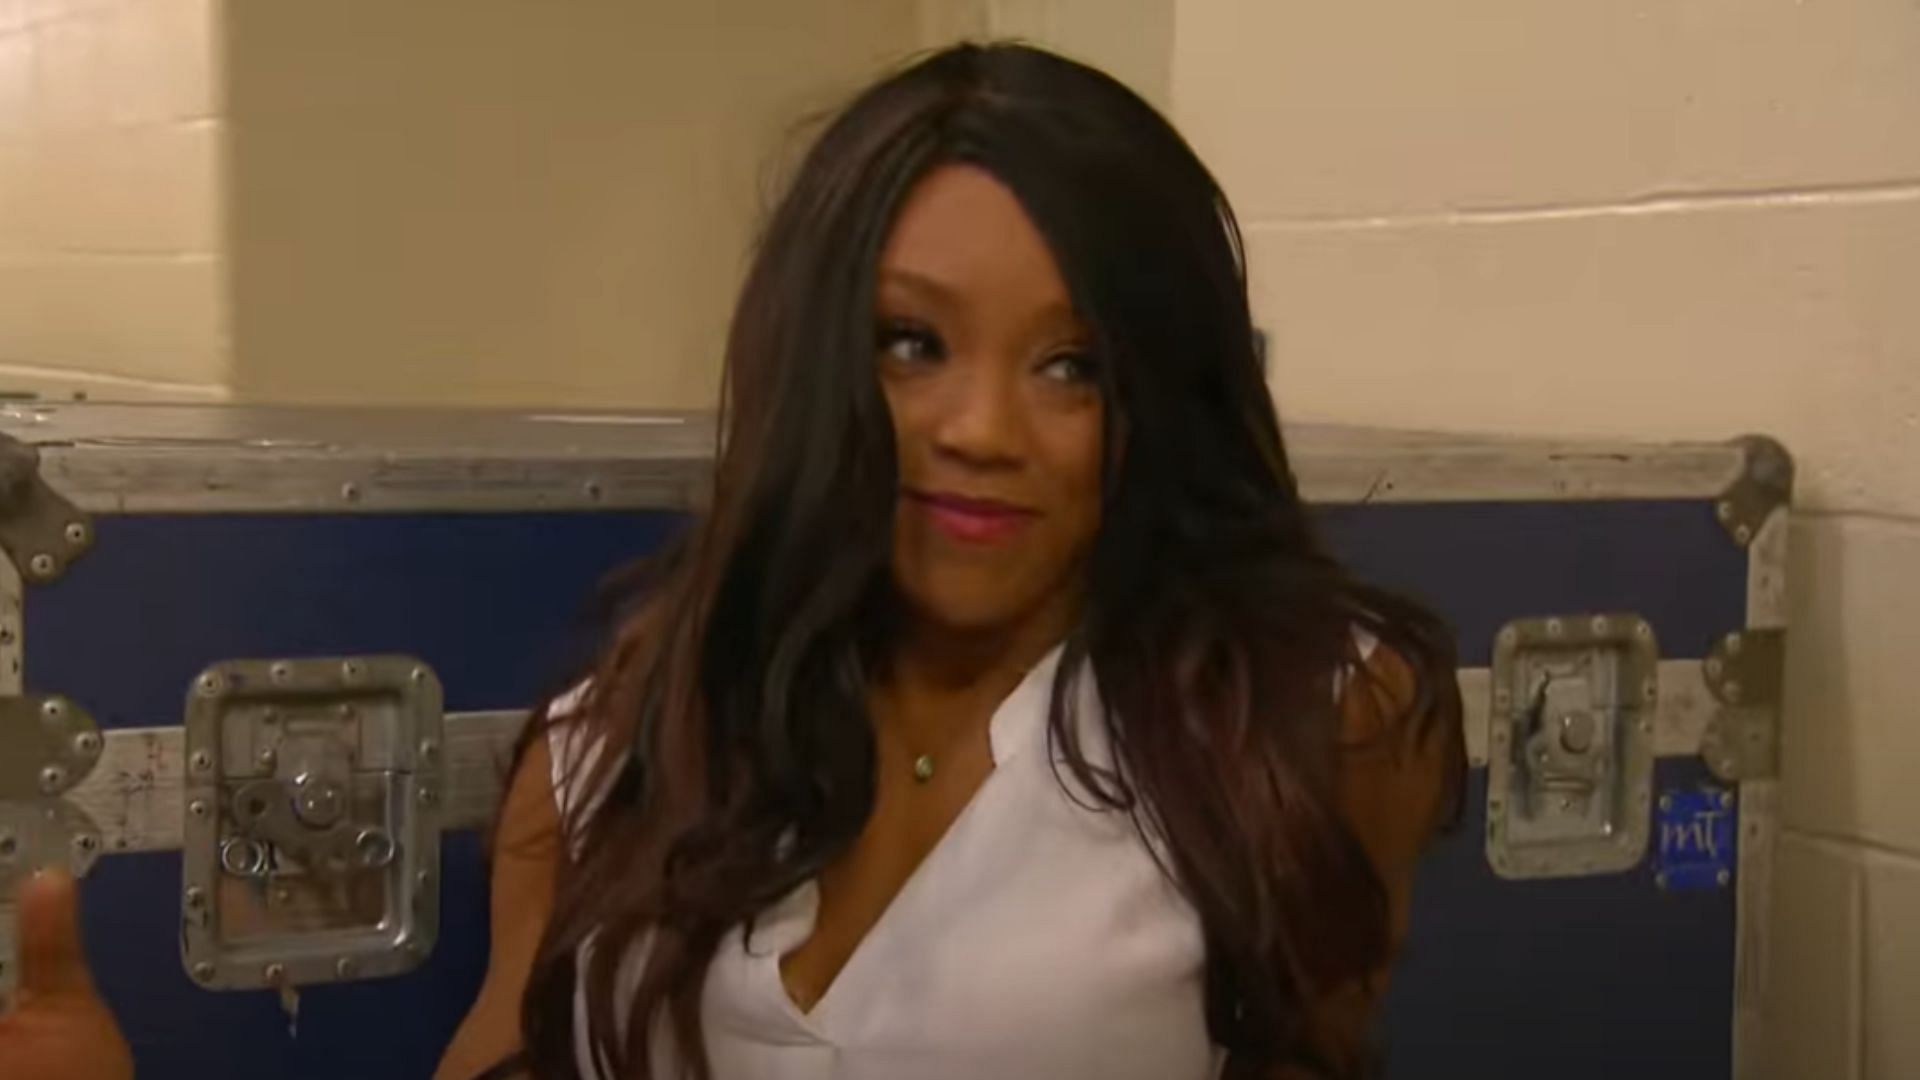 Alicia Fox worked for WWE between 2006 and 2023